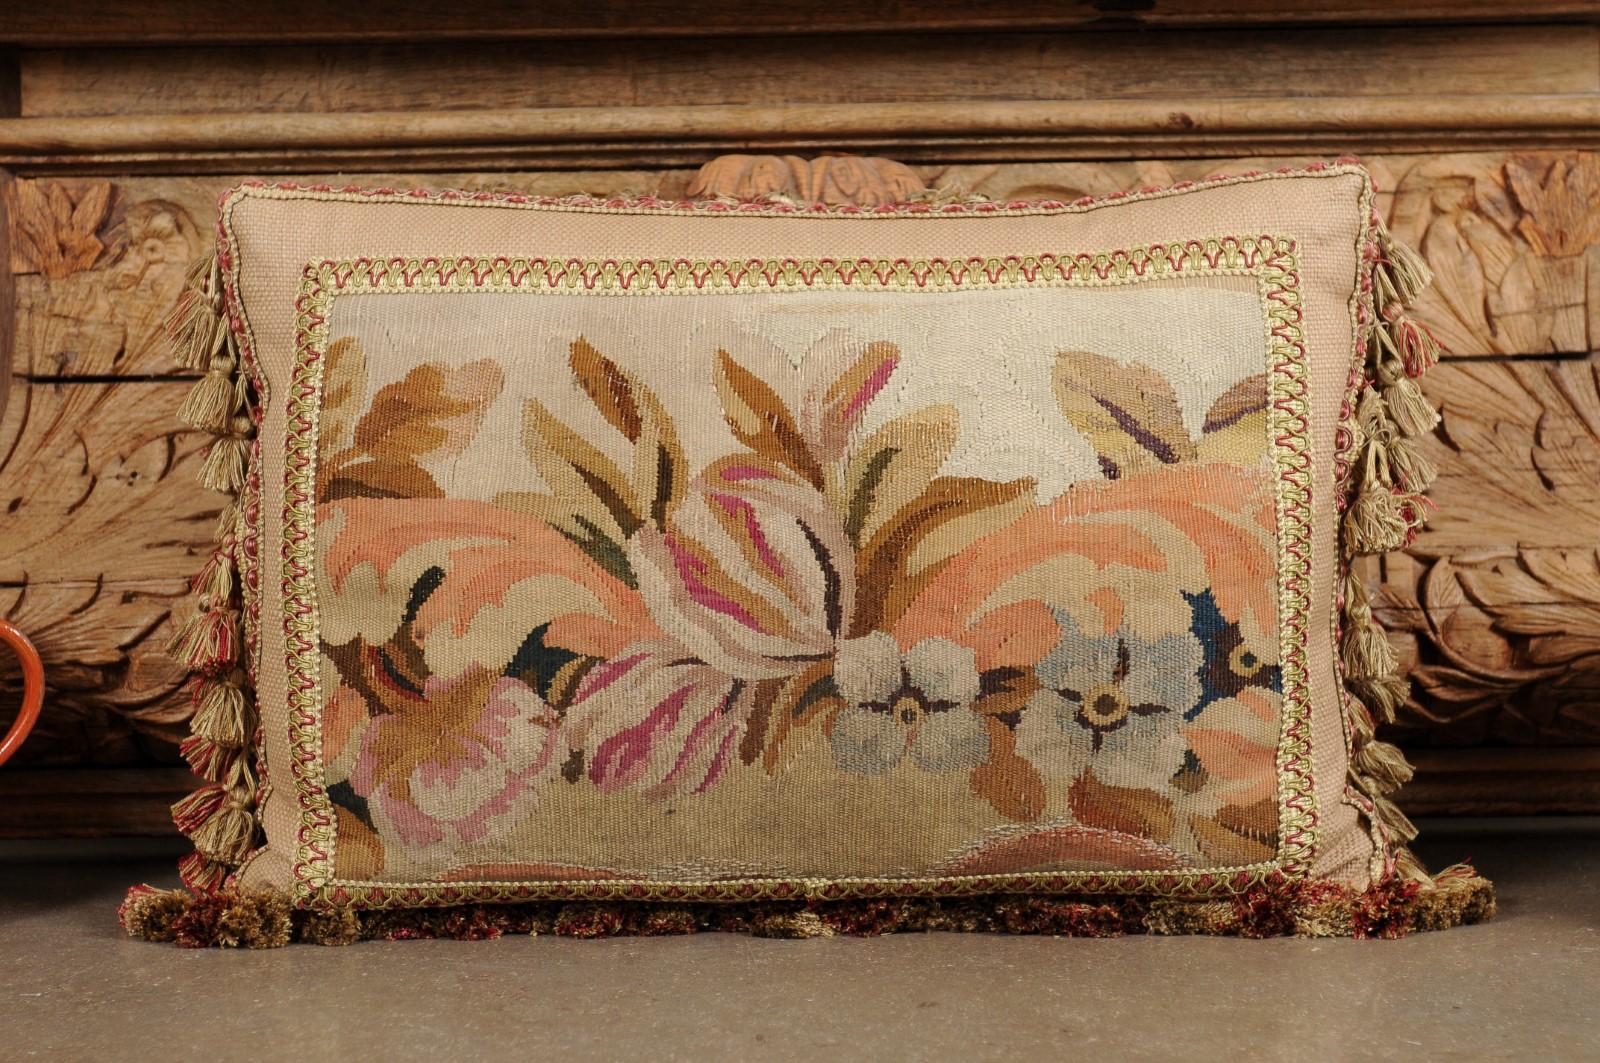 A pillow made from 19th century French tapestry, with floral decor and petite tassels. Created from a tapestry woven during the 19th century, this horizontal pillow is adorned with a delicate decor of blue and pink flowers accented with green, brown